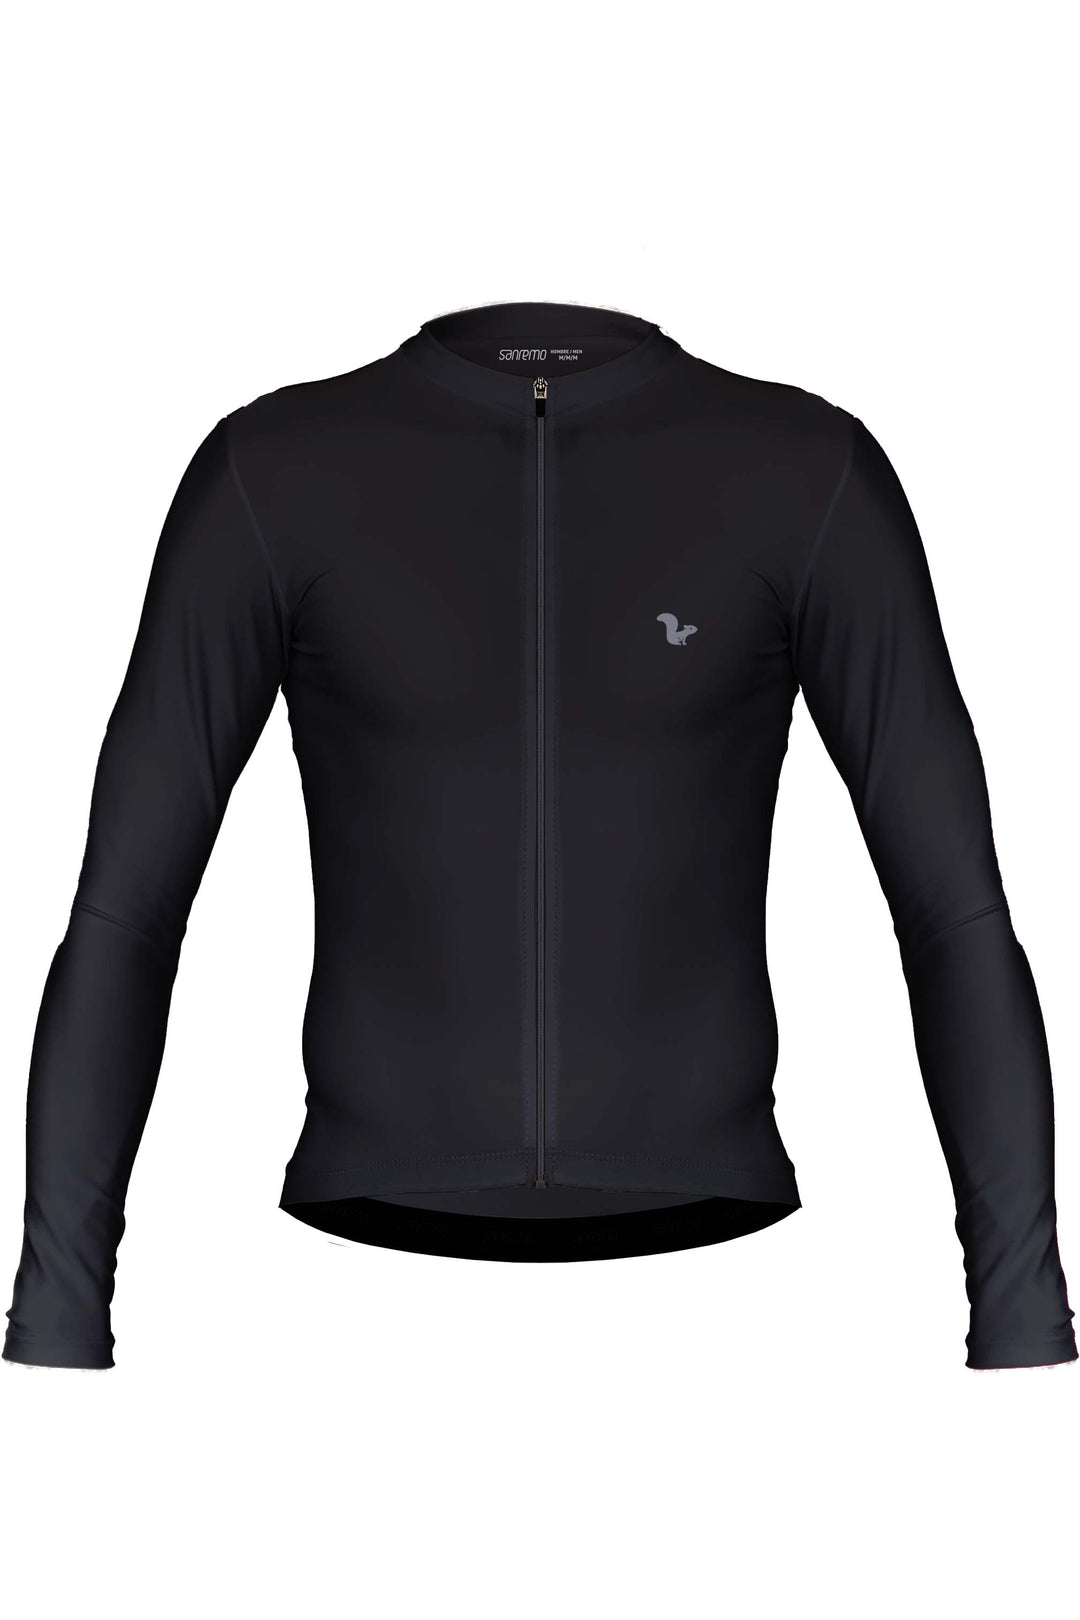 Jersey Corsa Thermal Negro - Hombre